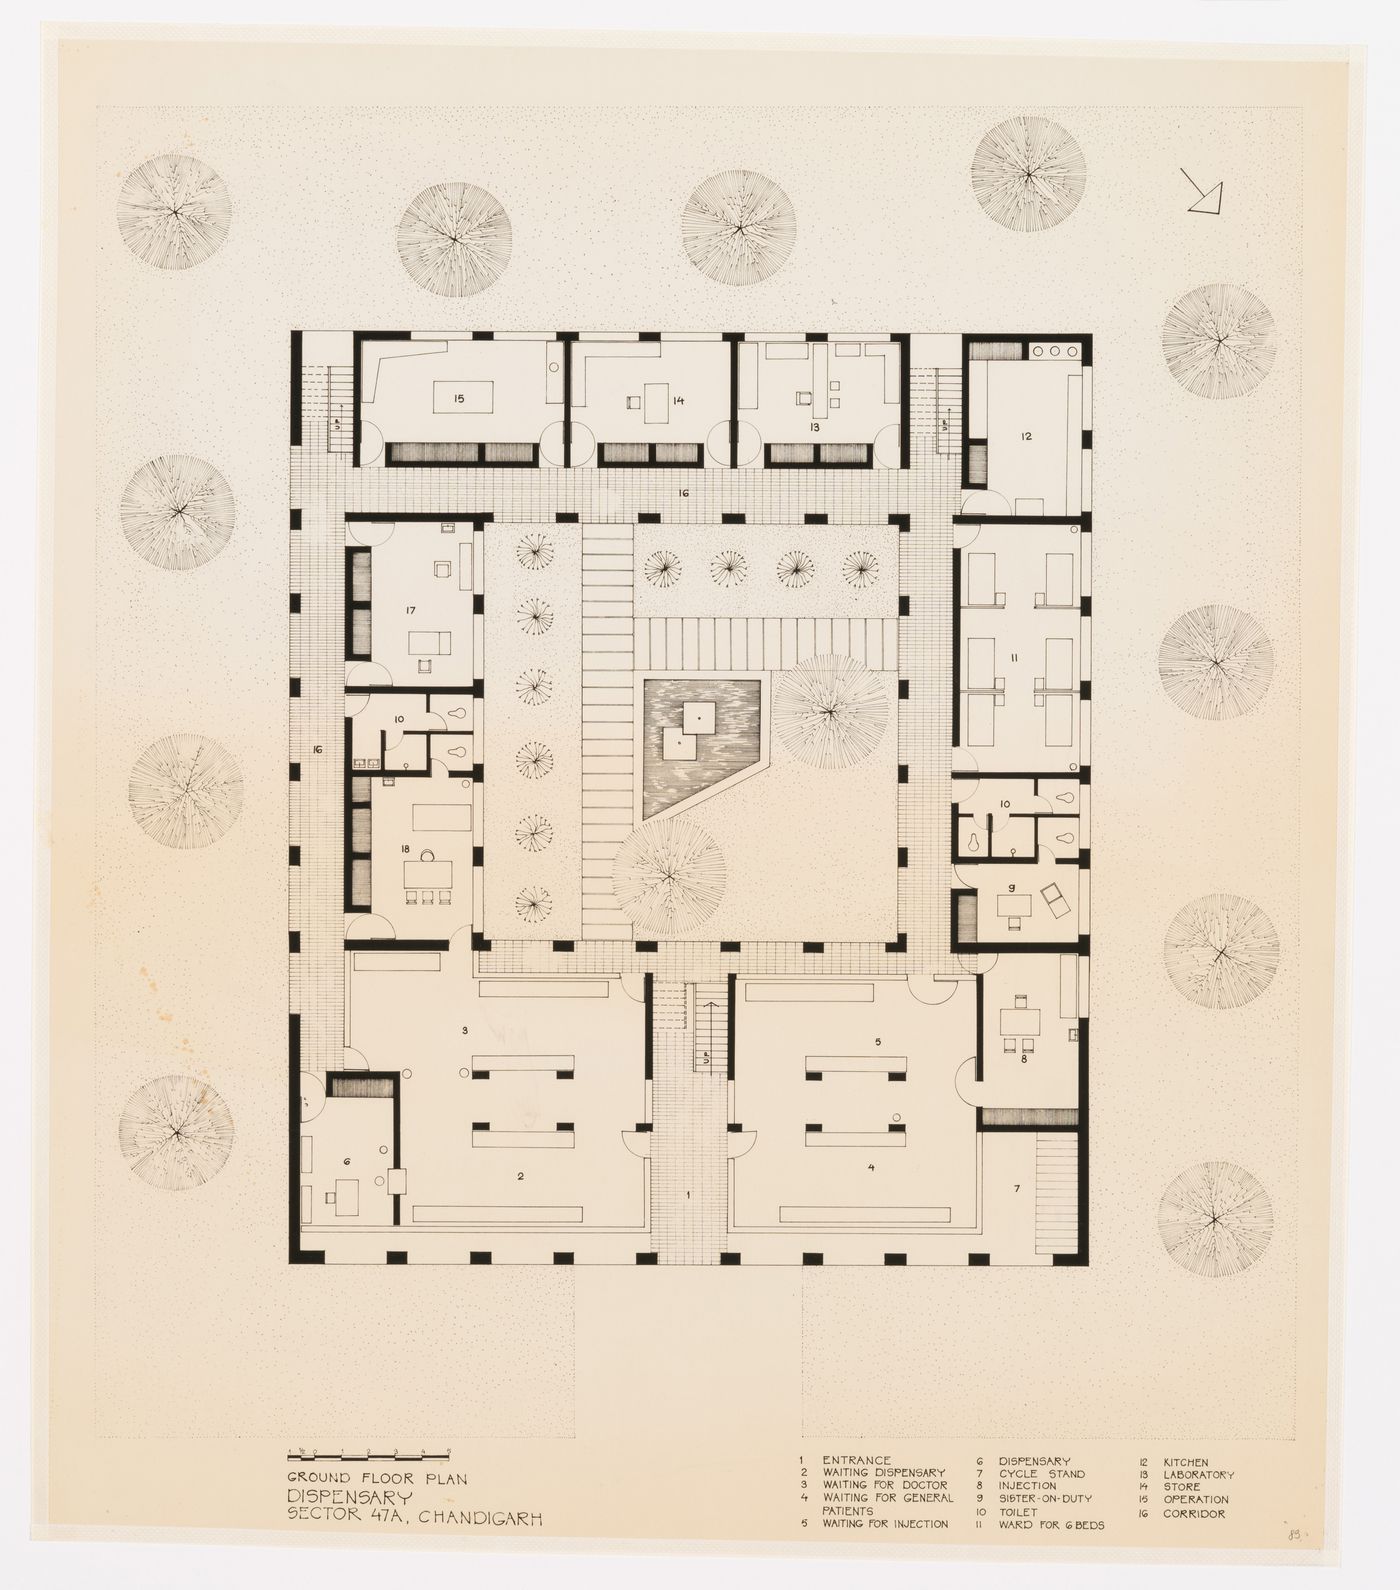 Ground floor plan for the Dispensary in sector 47-A in Chandigarh, India